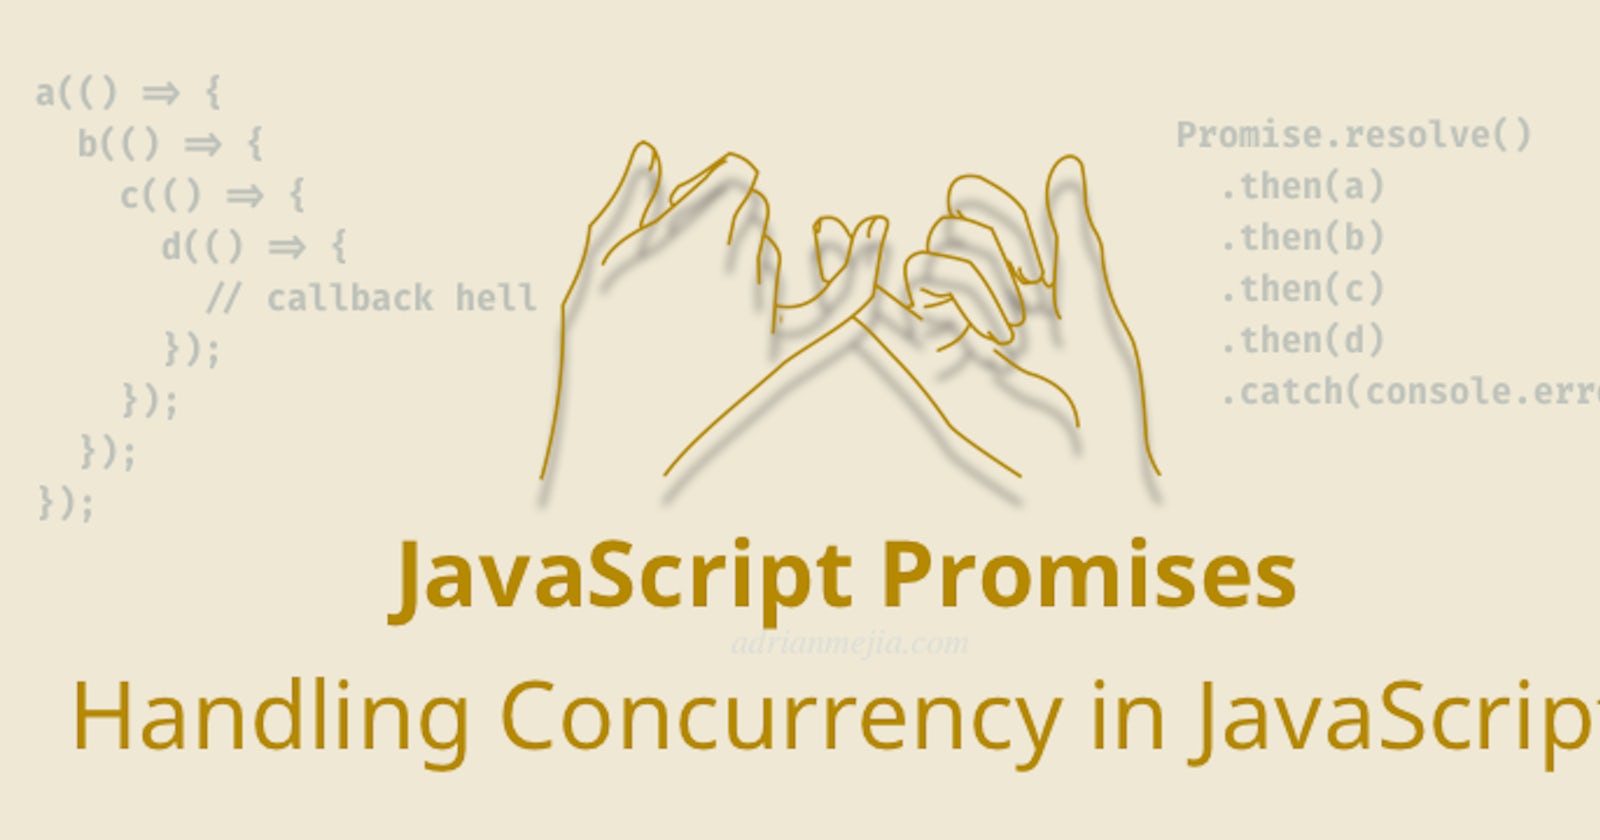 All you need to know about promises in JavaScript